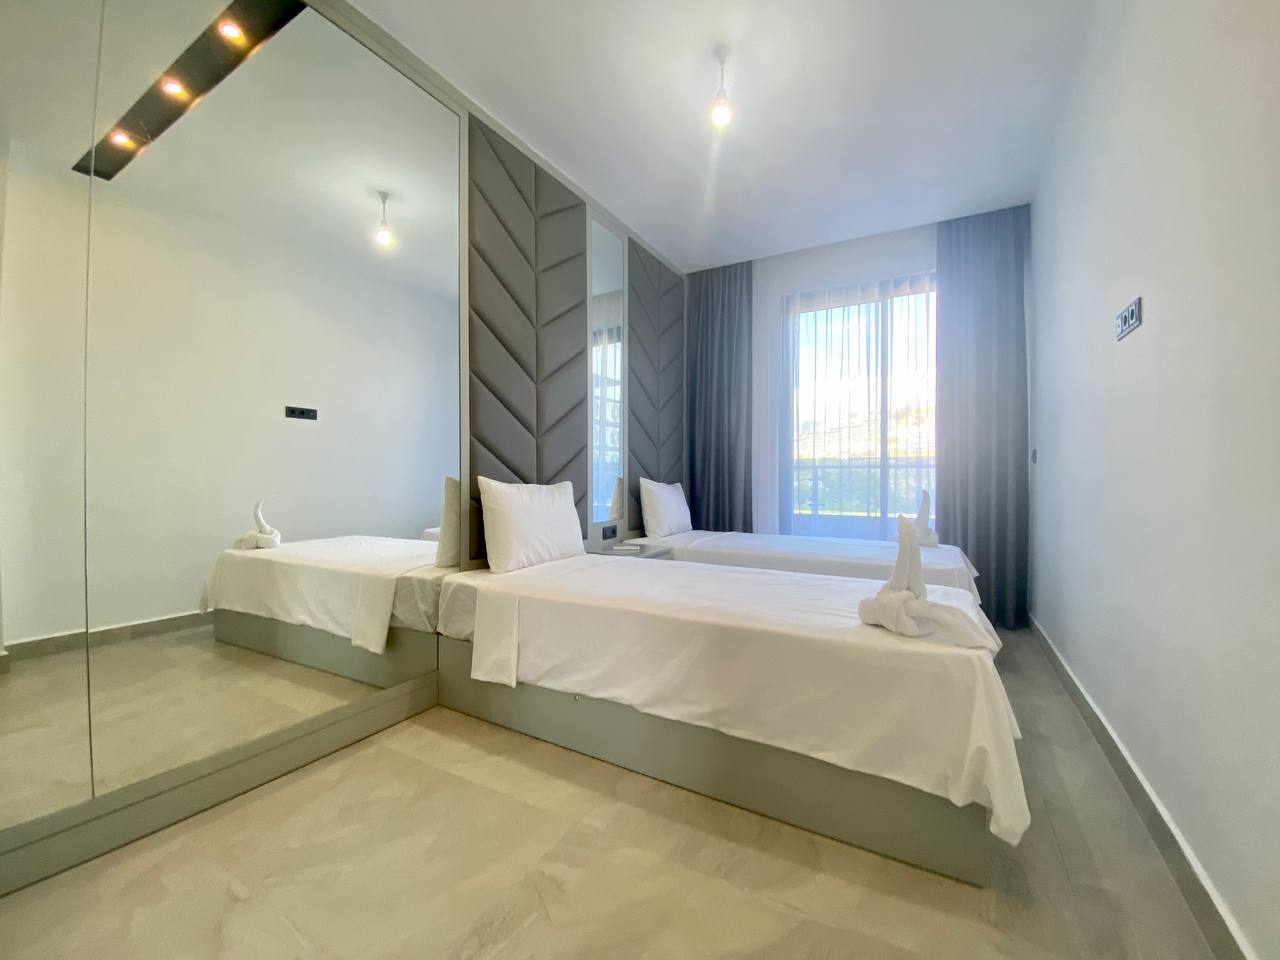 N°22 - Boutique 16 - Duplex Sea Front, For 8 People, Ultra Luxury